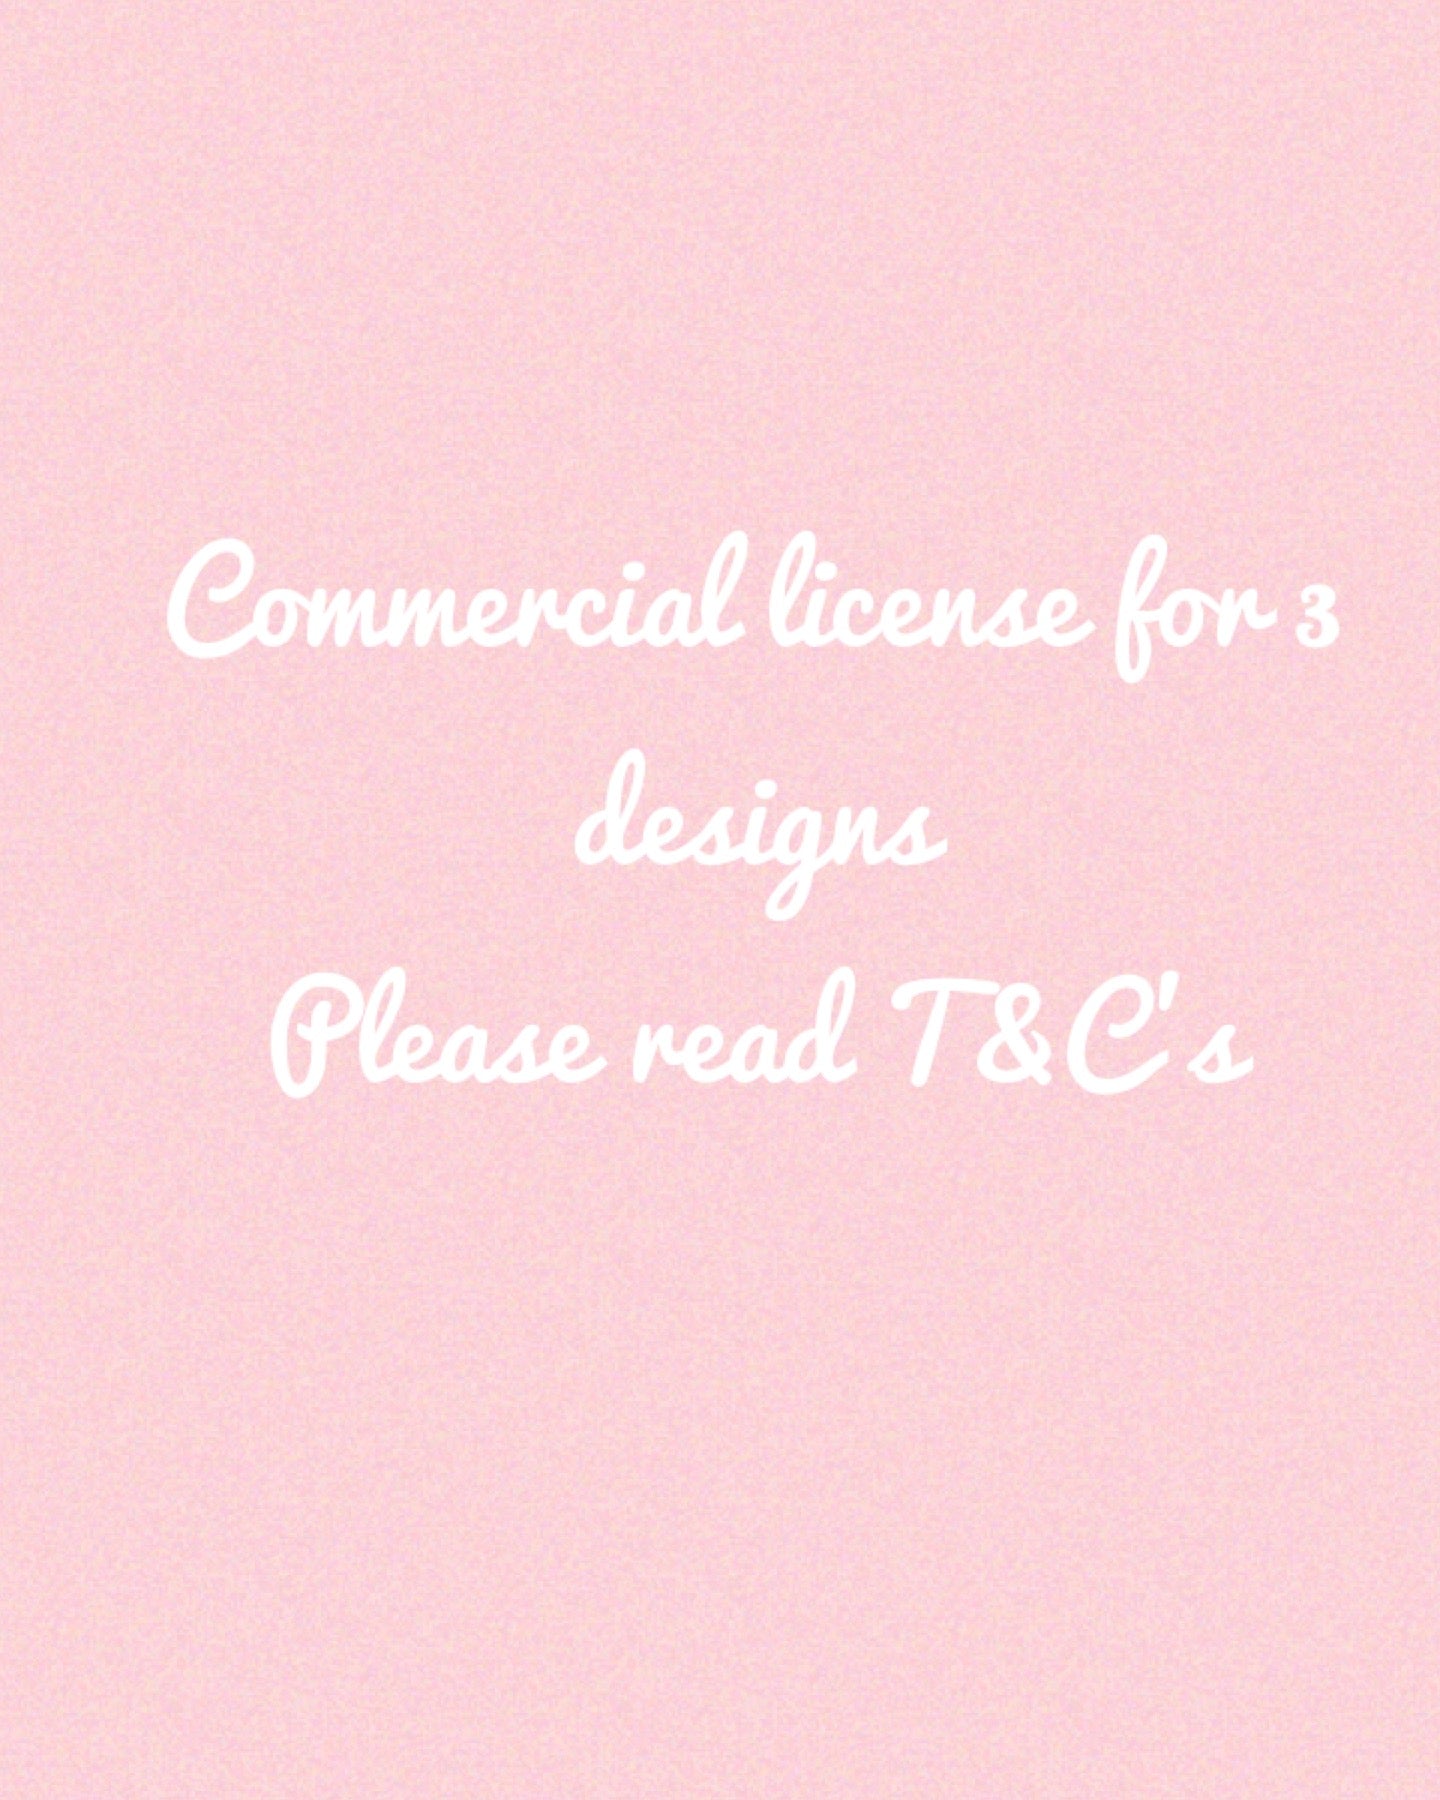 Commercial License for 3 Designs